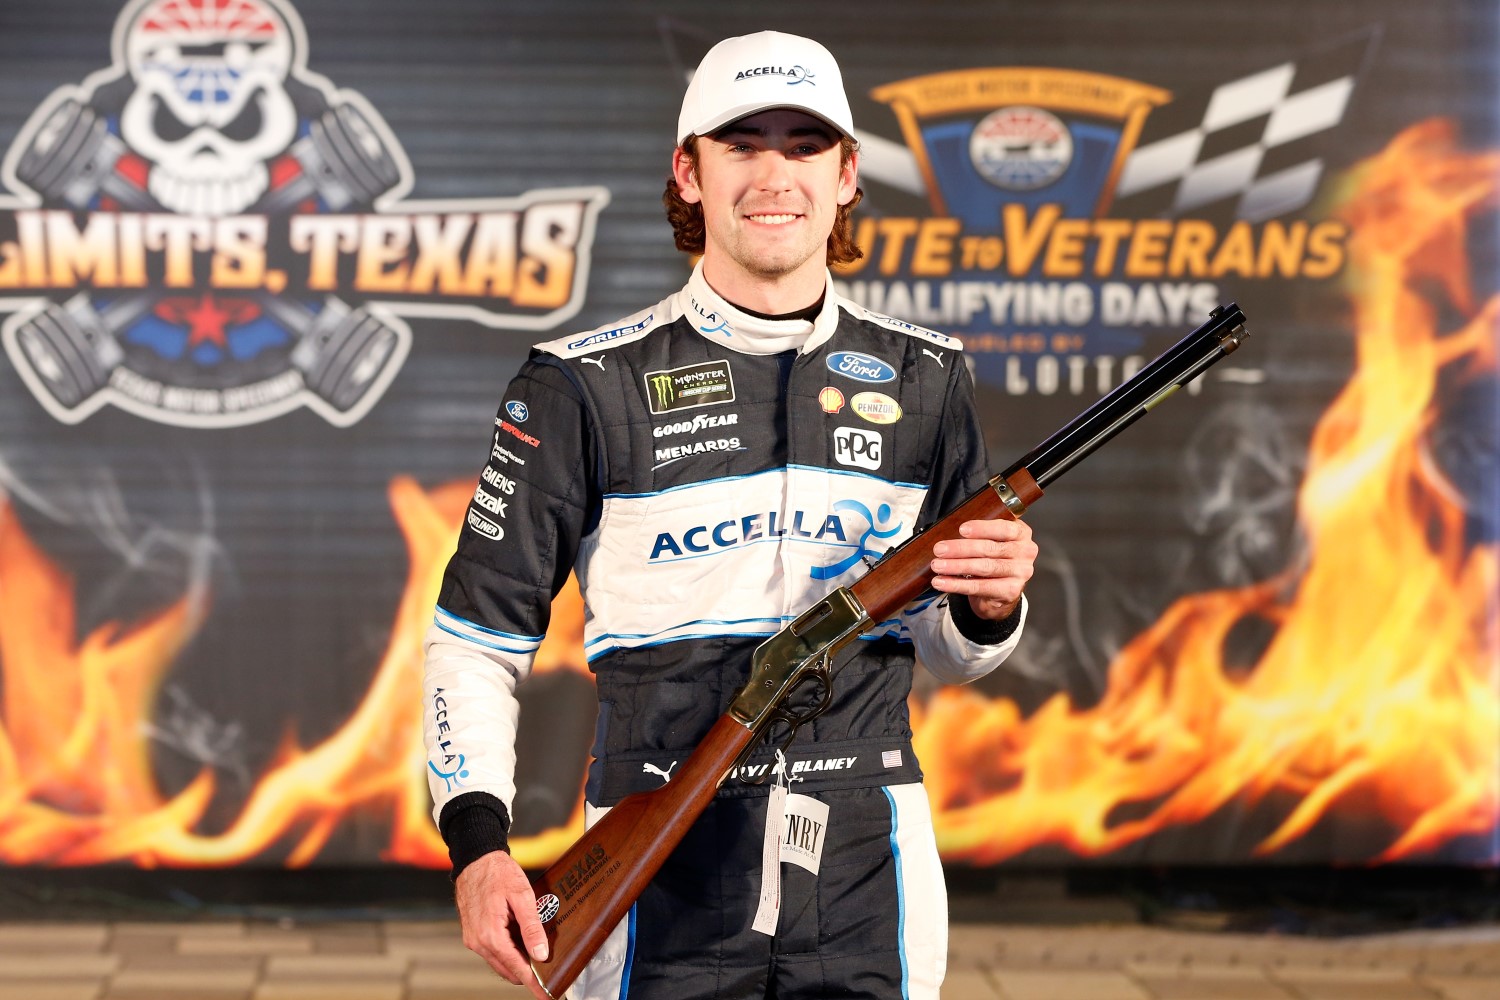 Blaney gets a gun for winning the pole